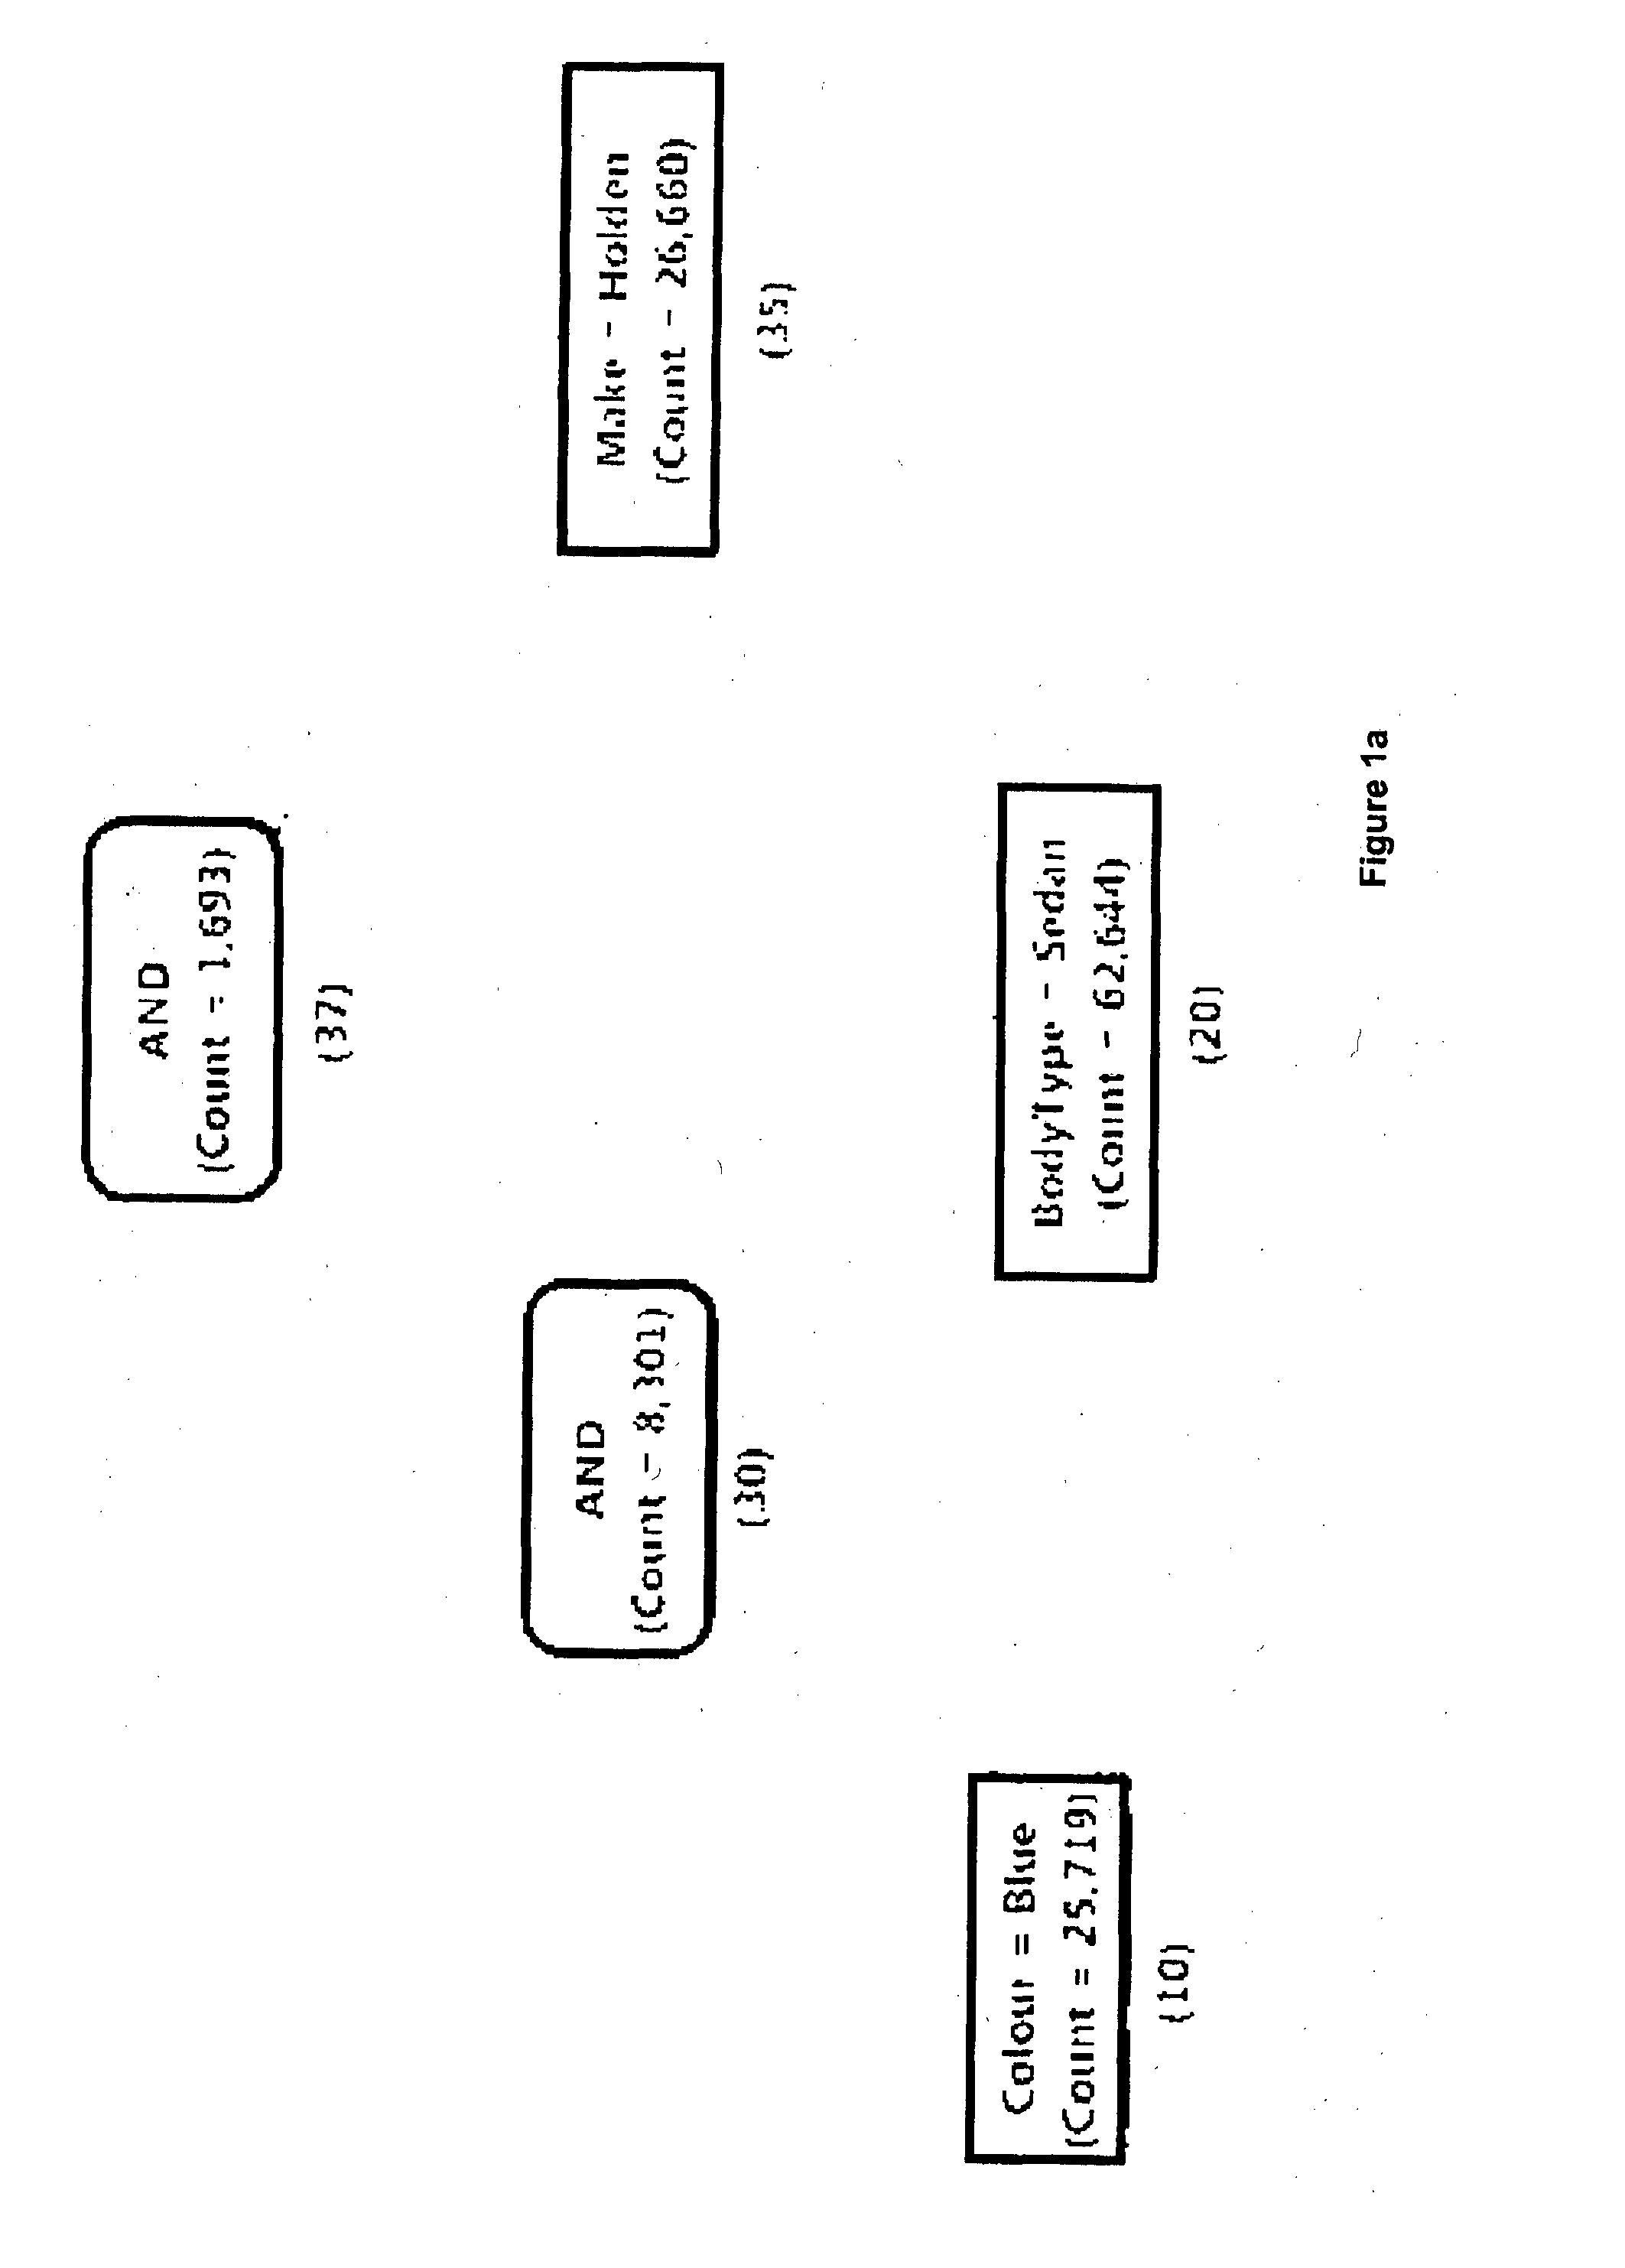 System and method for implementing multi-faceted search queries